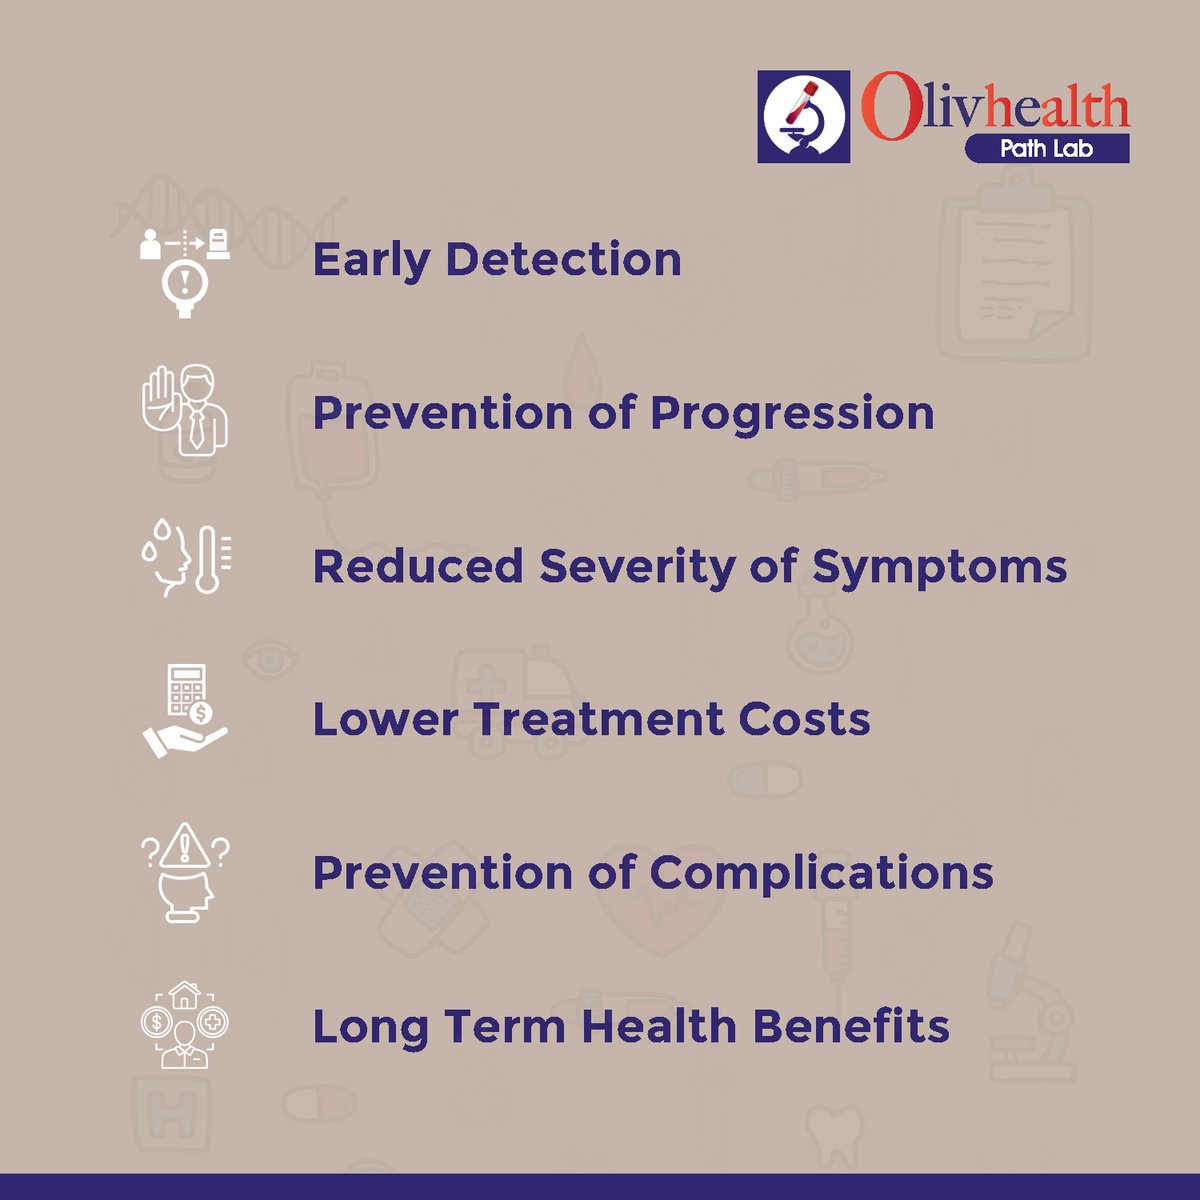 'Taking strides towards healthier lives, one test at a time. Welcome to OlivHealth Path Lab, where precision meets care.'

#olivhealthpathlab #Healthcare #Wellness #diagnostics #TimelyTreatment #pathology